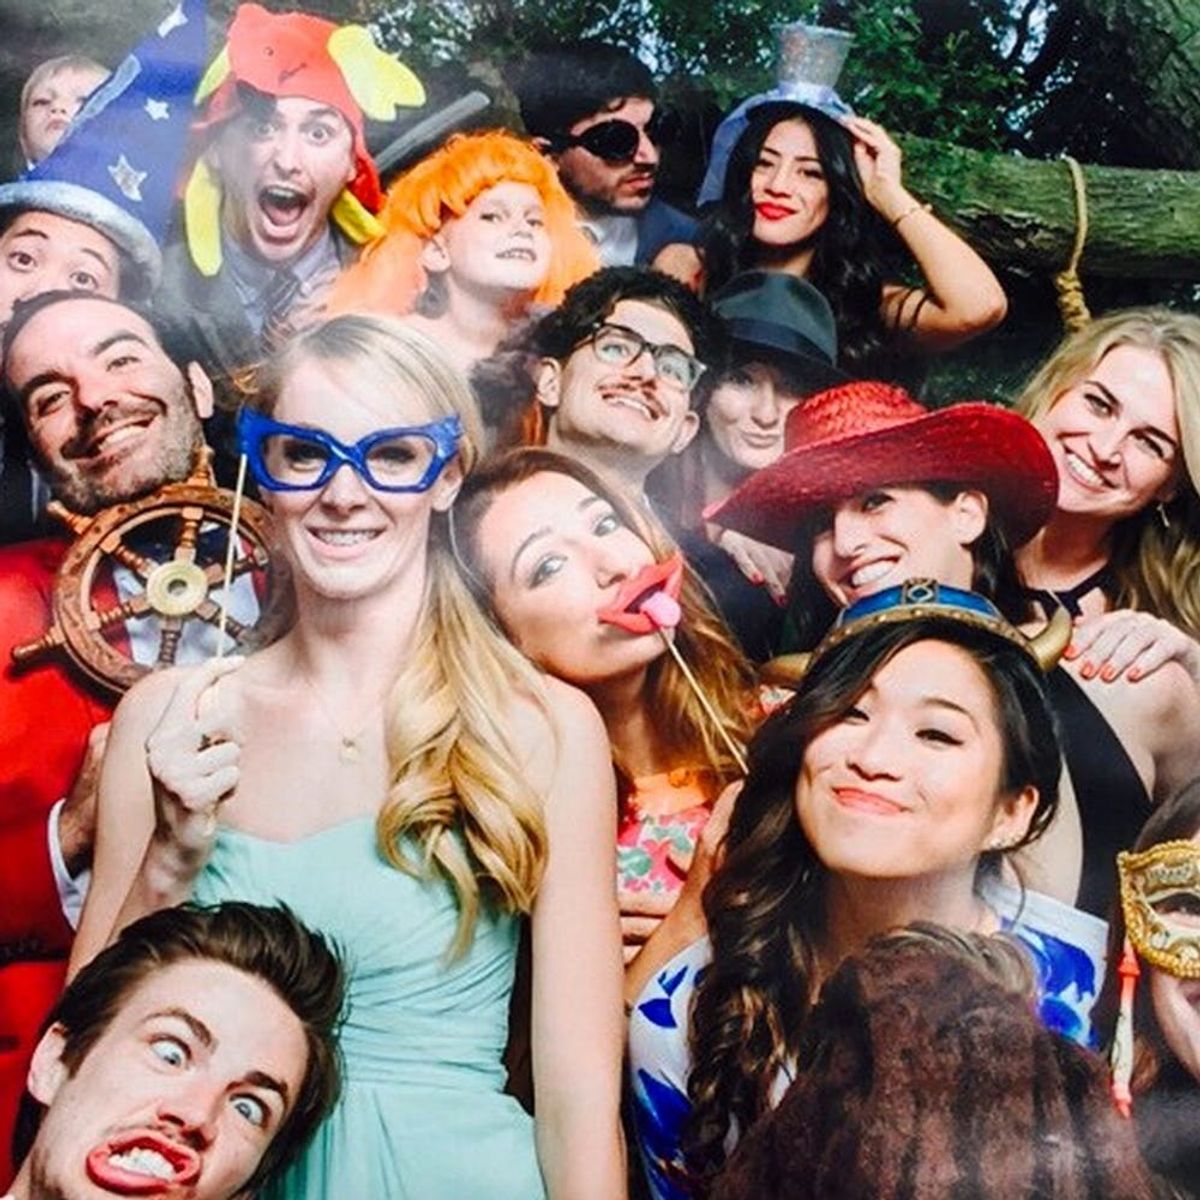 This Glee Star’s Wedding Was a Giant Cast Reunion